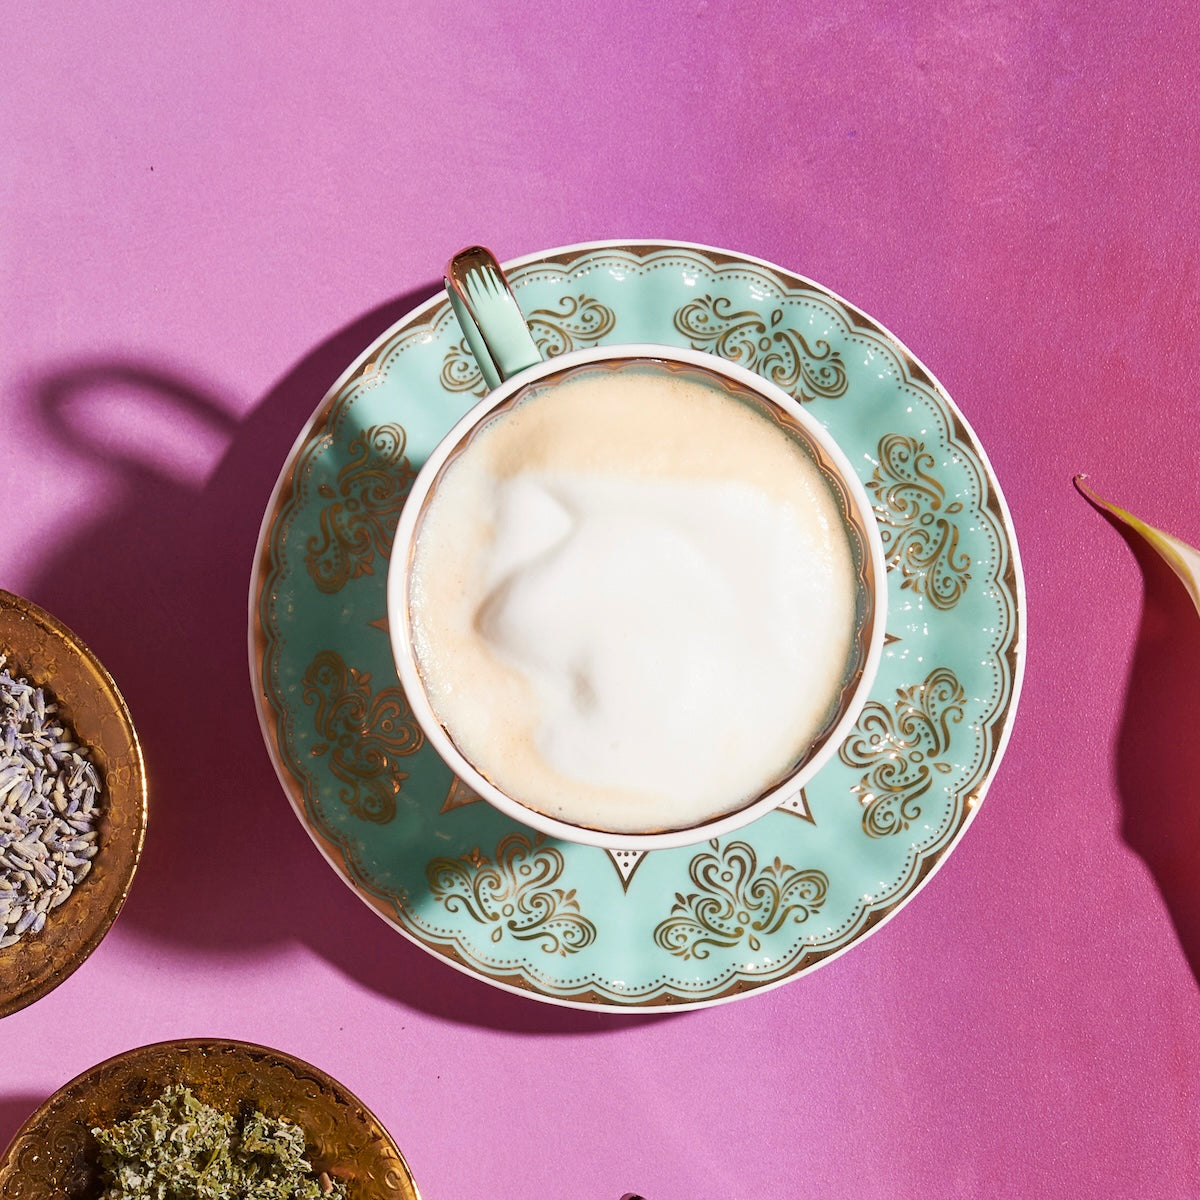 A cup of cappuccino with frothy milk on top is placed on a decorative turquoise saucer with intricate patterns. The saucer rests on a pink surface. Surrounding the cup are small bowls containing organic herbs, creating an inviting atmosphere for a Magic Hour: The Empress: Lavender Currant Shatavari Cocoa Tea of Nurturing Creativity experience.